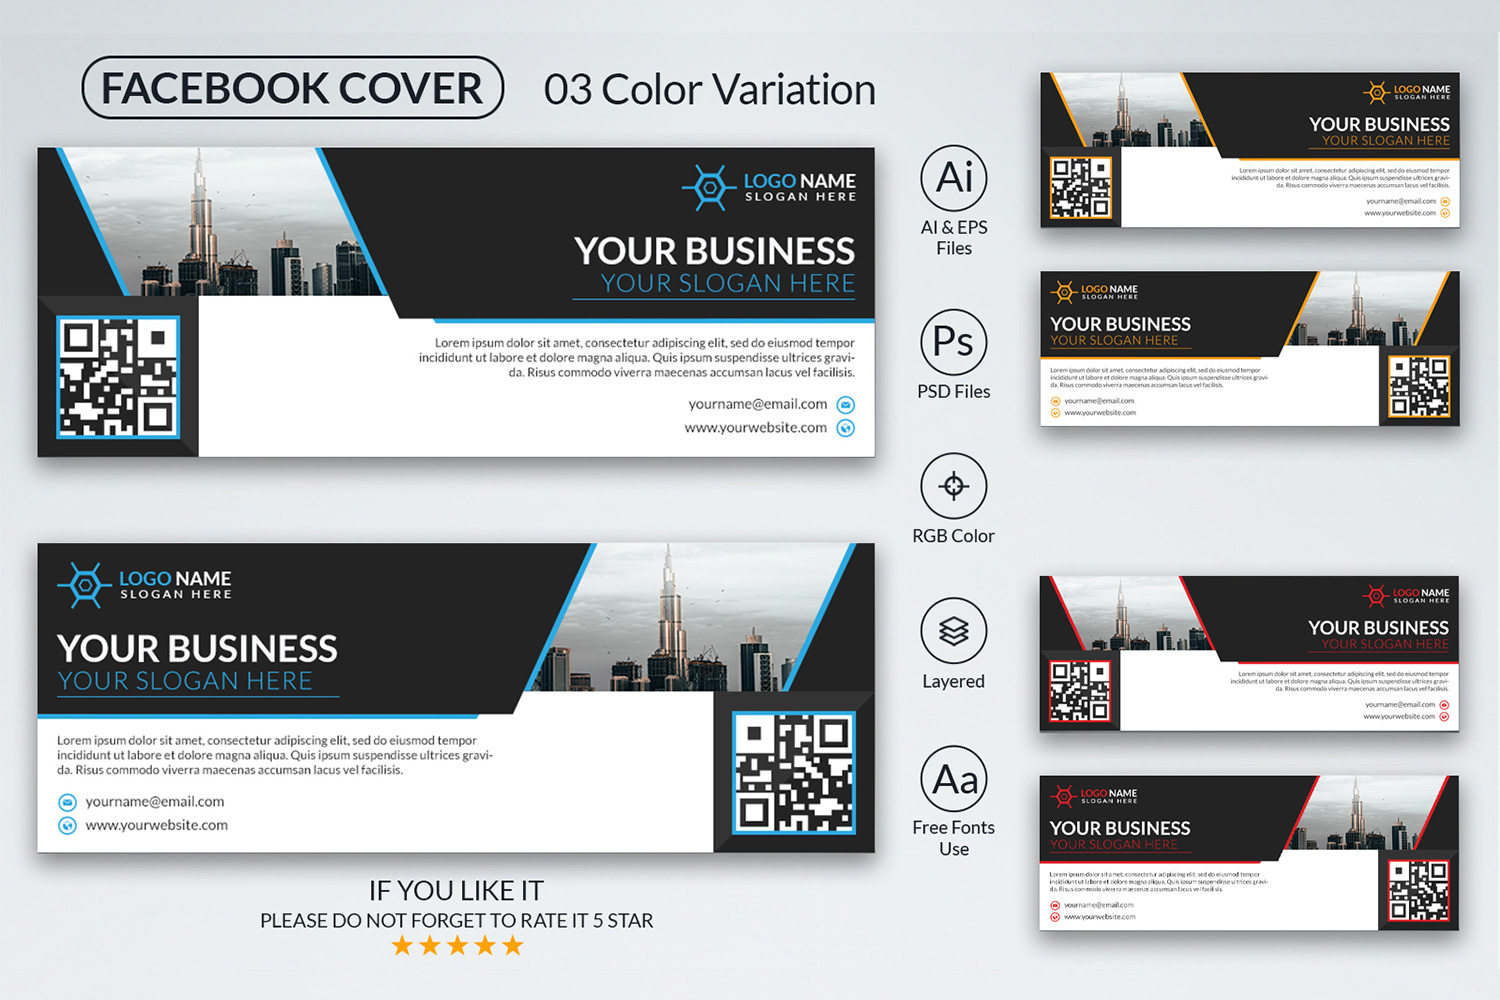 Presentation of a Professional Facebook Cover Template.